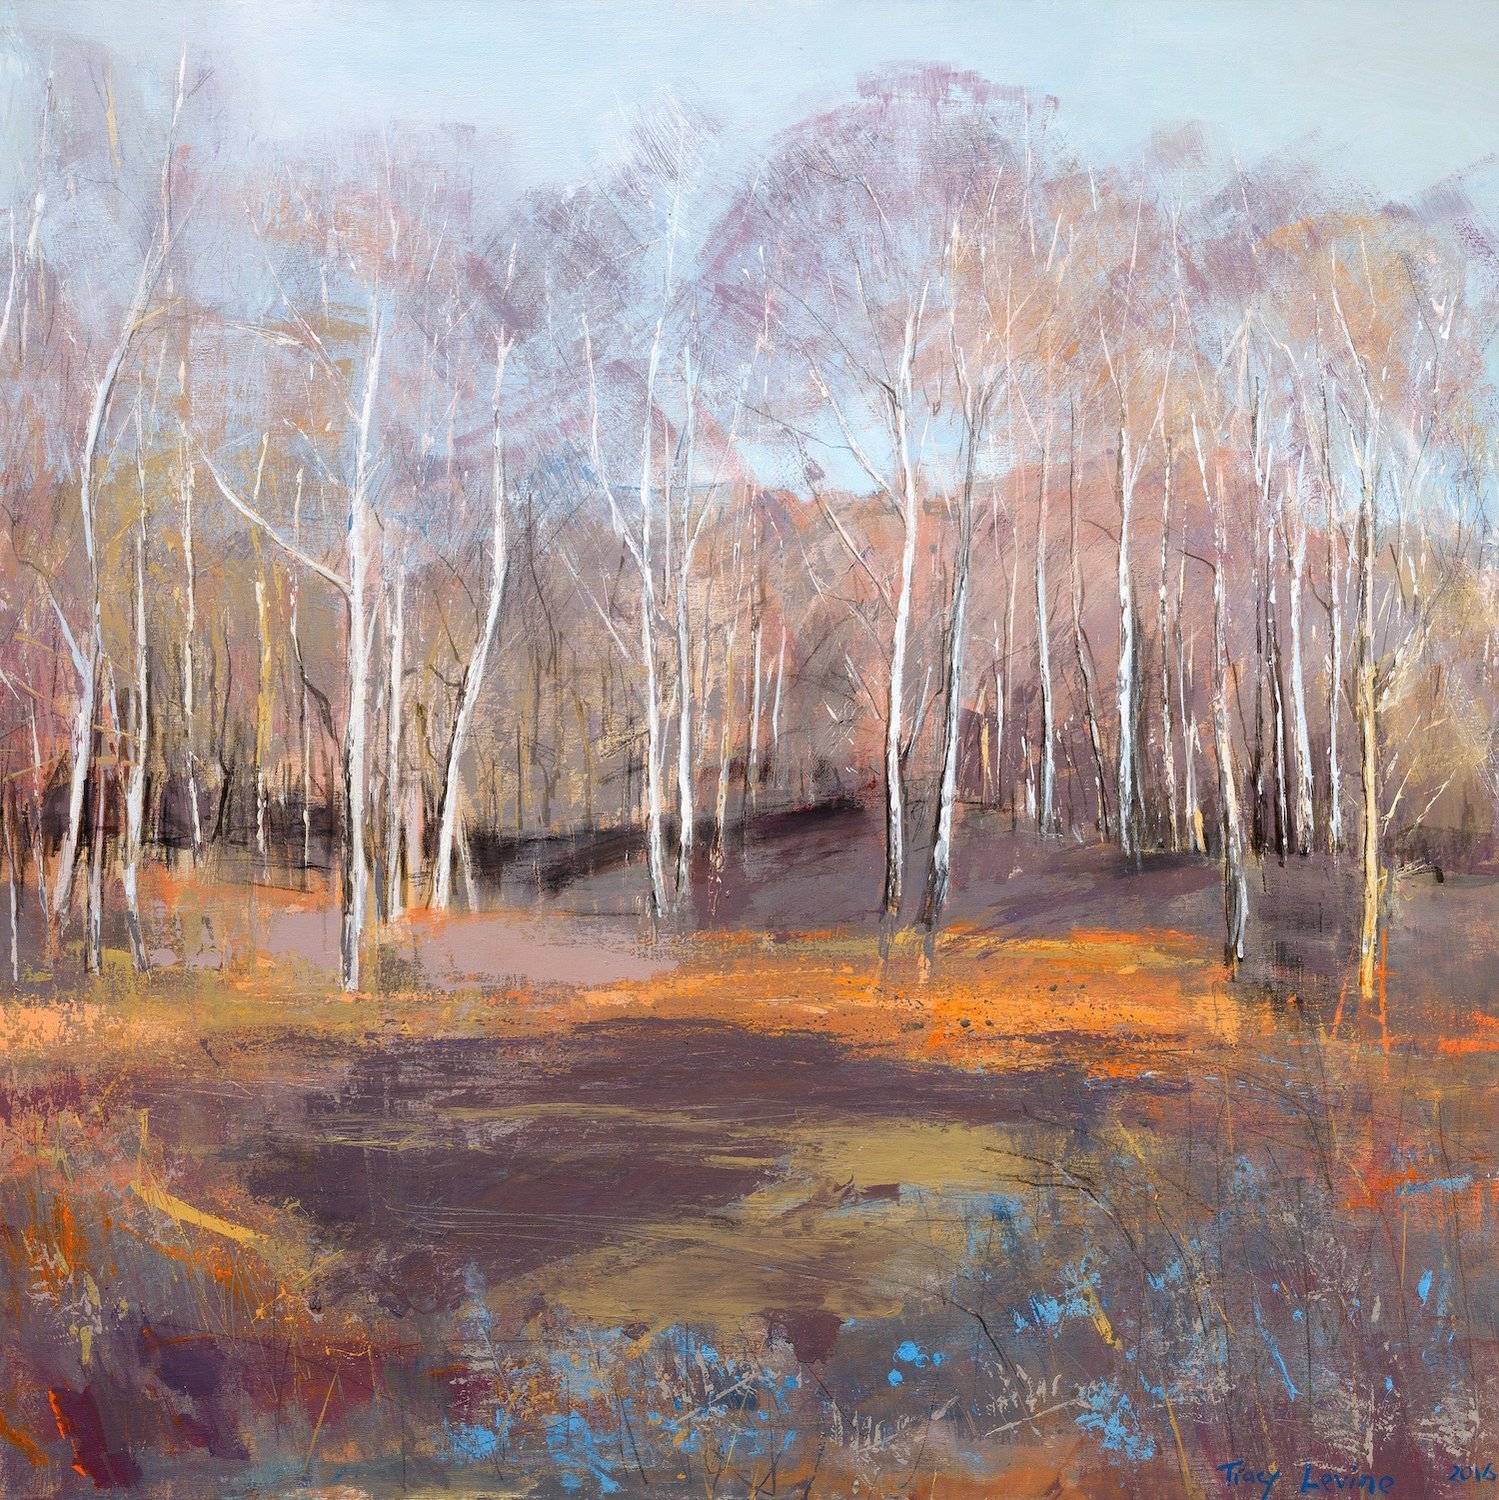 Silver Birch, on a Winters Day. Reproduction print.